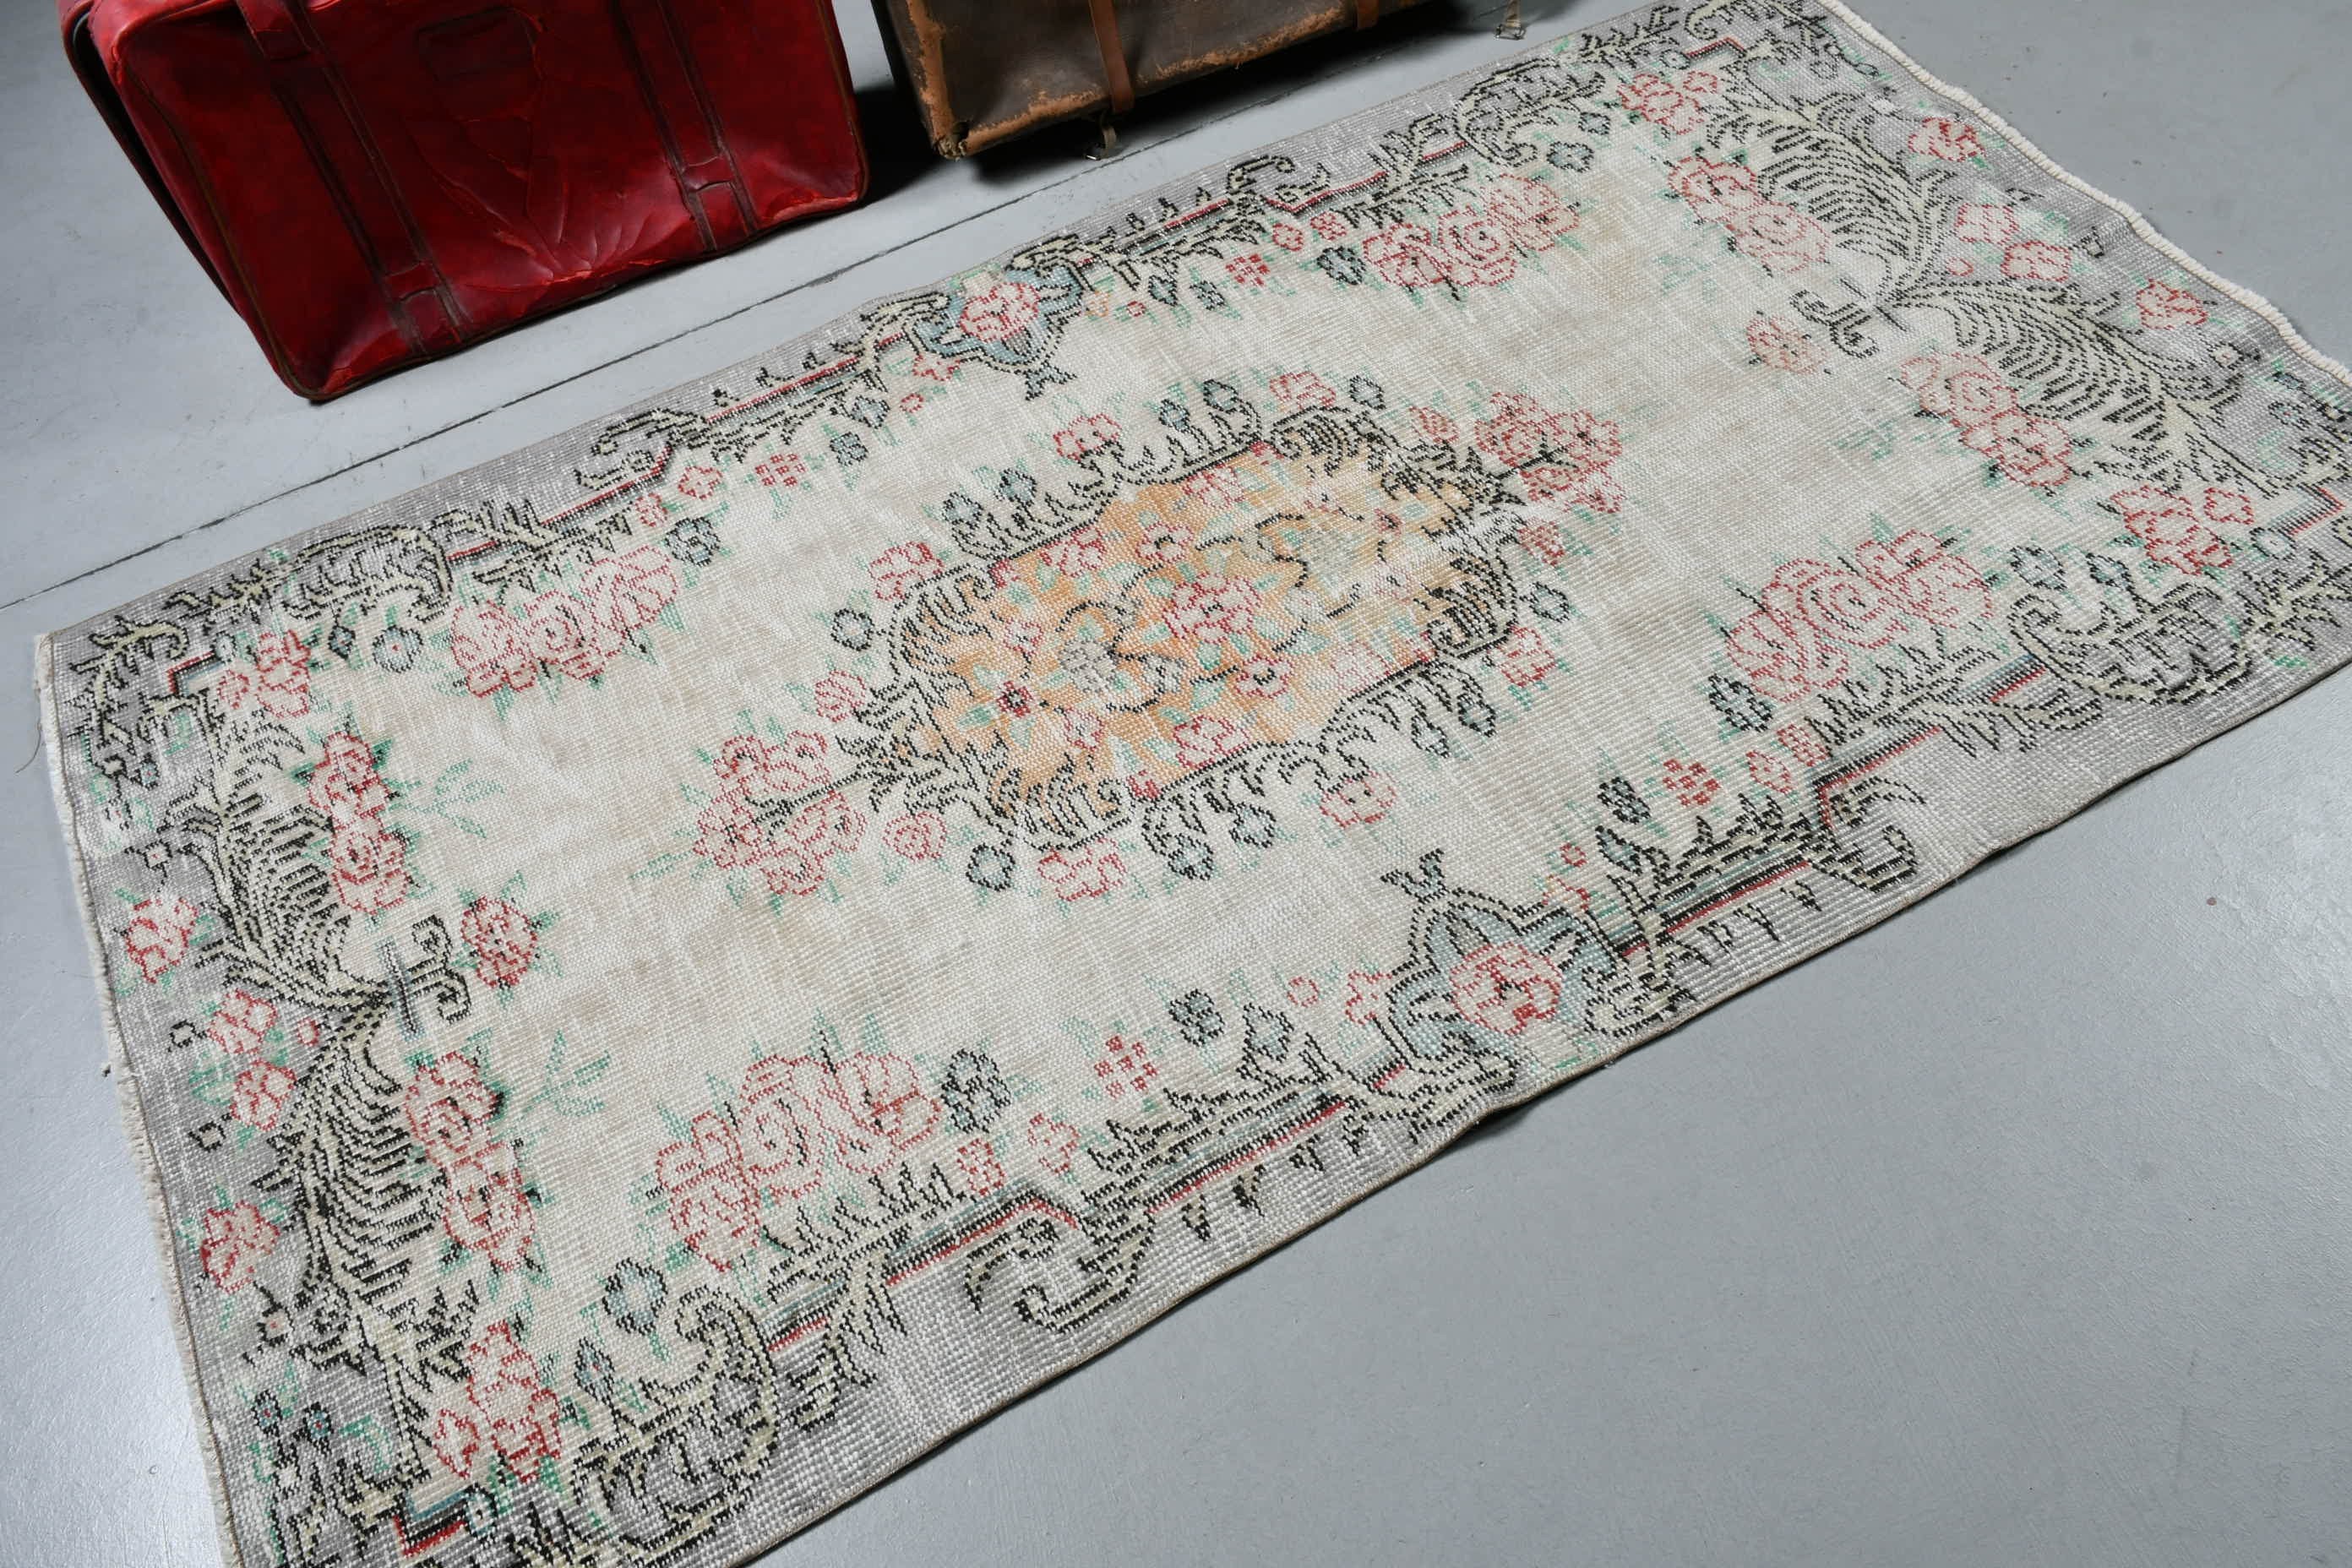 Vintage Rug, Beige Wool Rug, 3.6x6.3 ft Accent Rug, Entry Rug, Anatolian Rug, Turkish Rugs, Bedroom Rug, Moroccan Rugs, Rugs for Kitchen